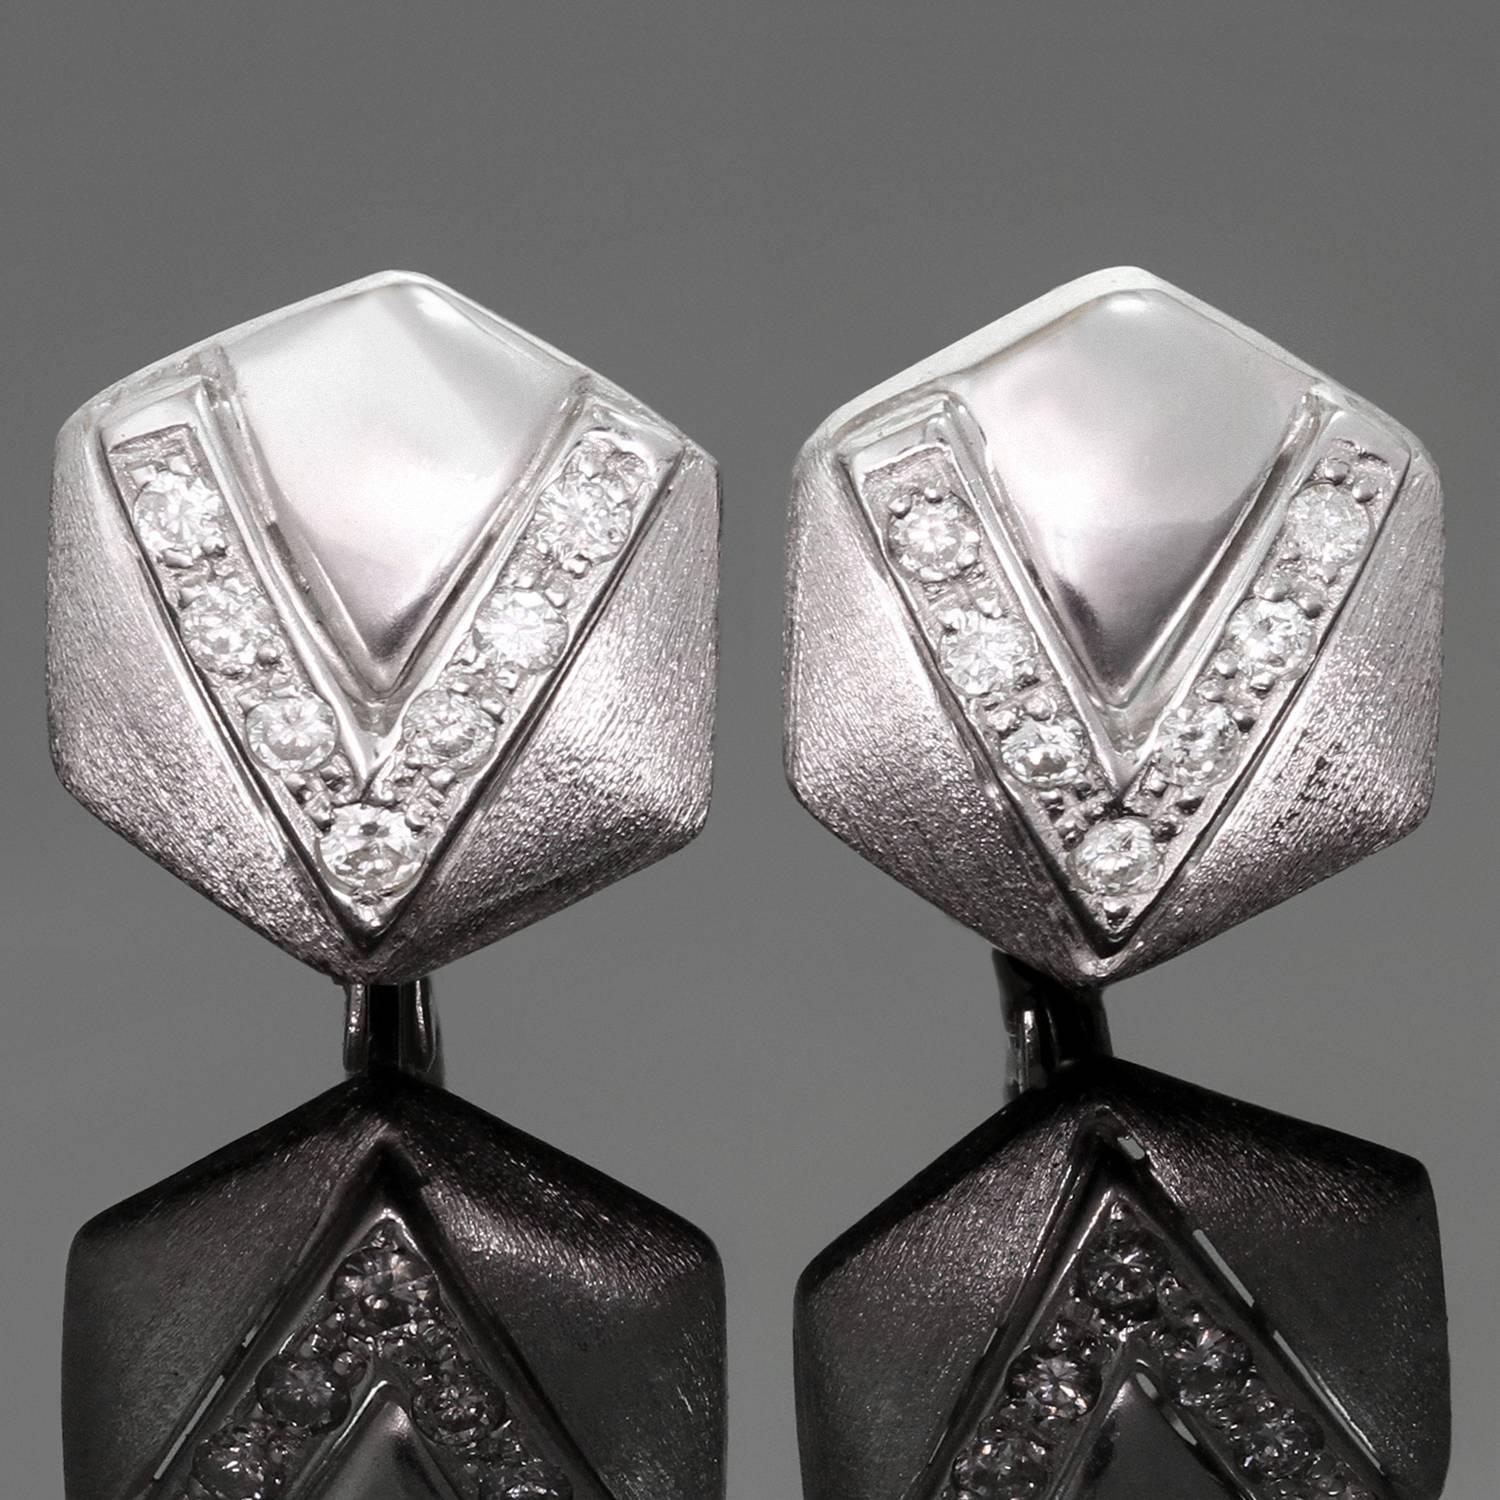 These classic lever-back earrings feature a pentagonal shape crafted in 14k white gold and set with brilliant-cut round diamonds of an estimated 0.40 carats. Made in United States circa 1990s. Measurements: 0.51